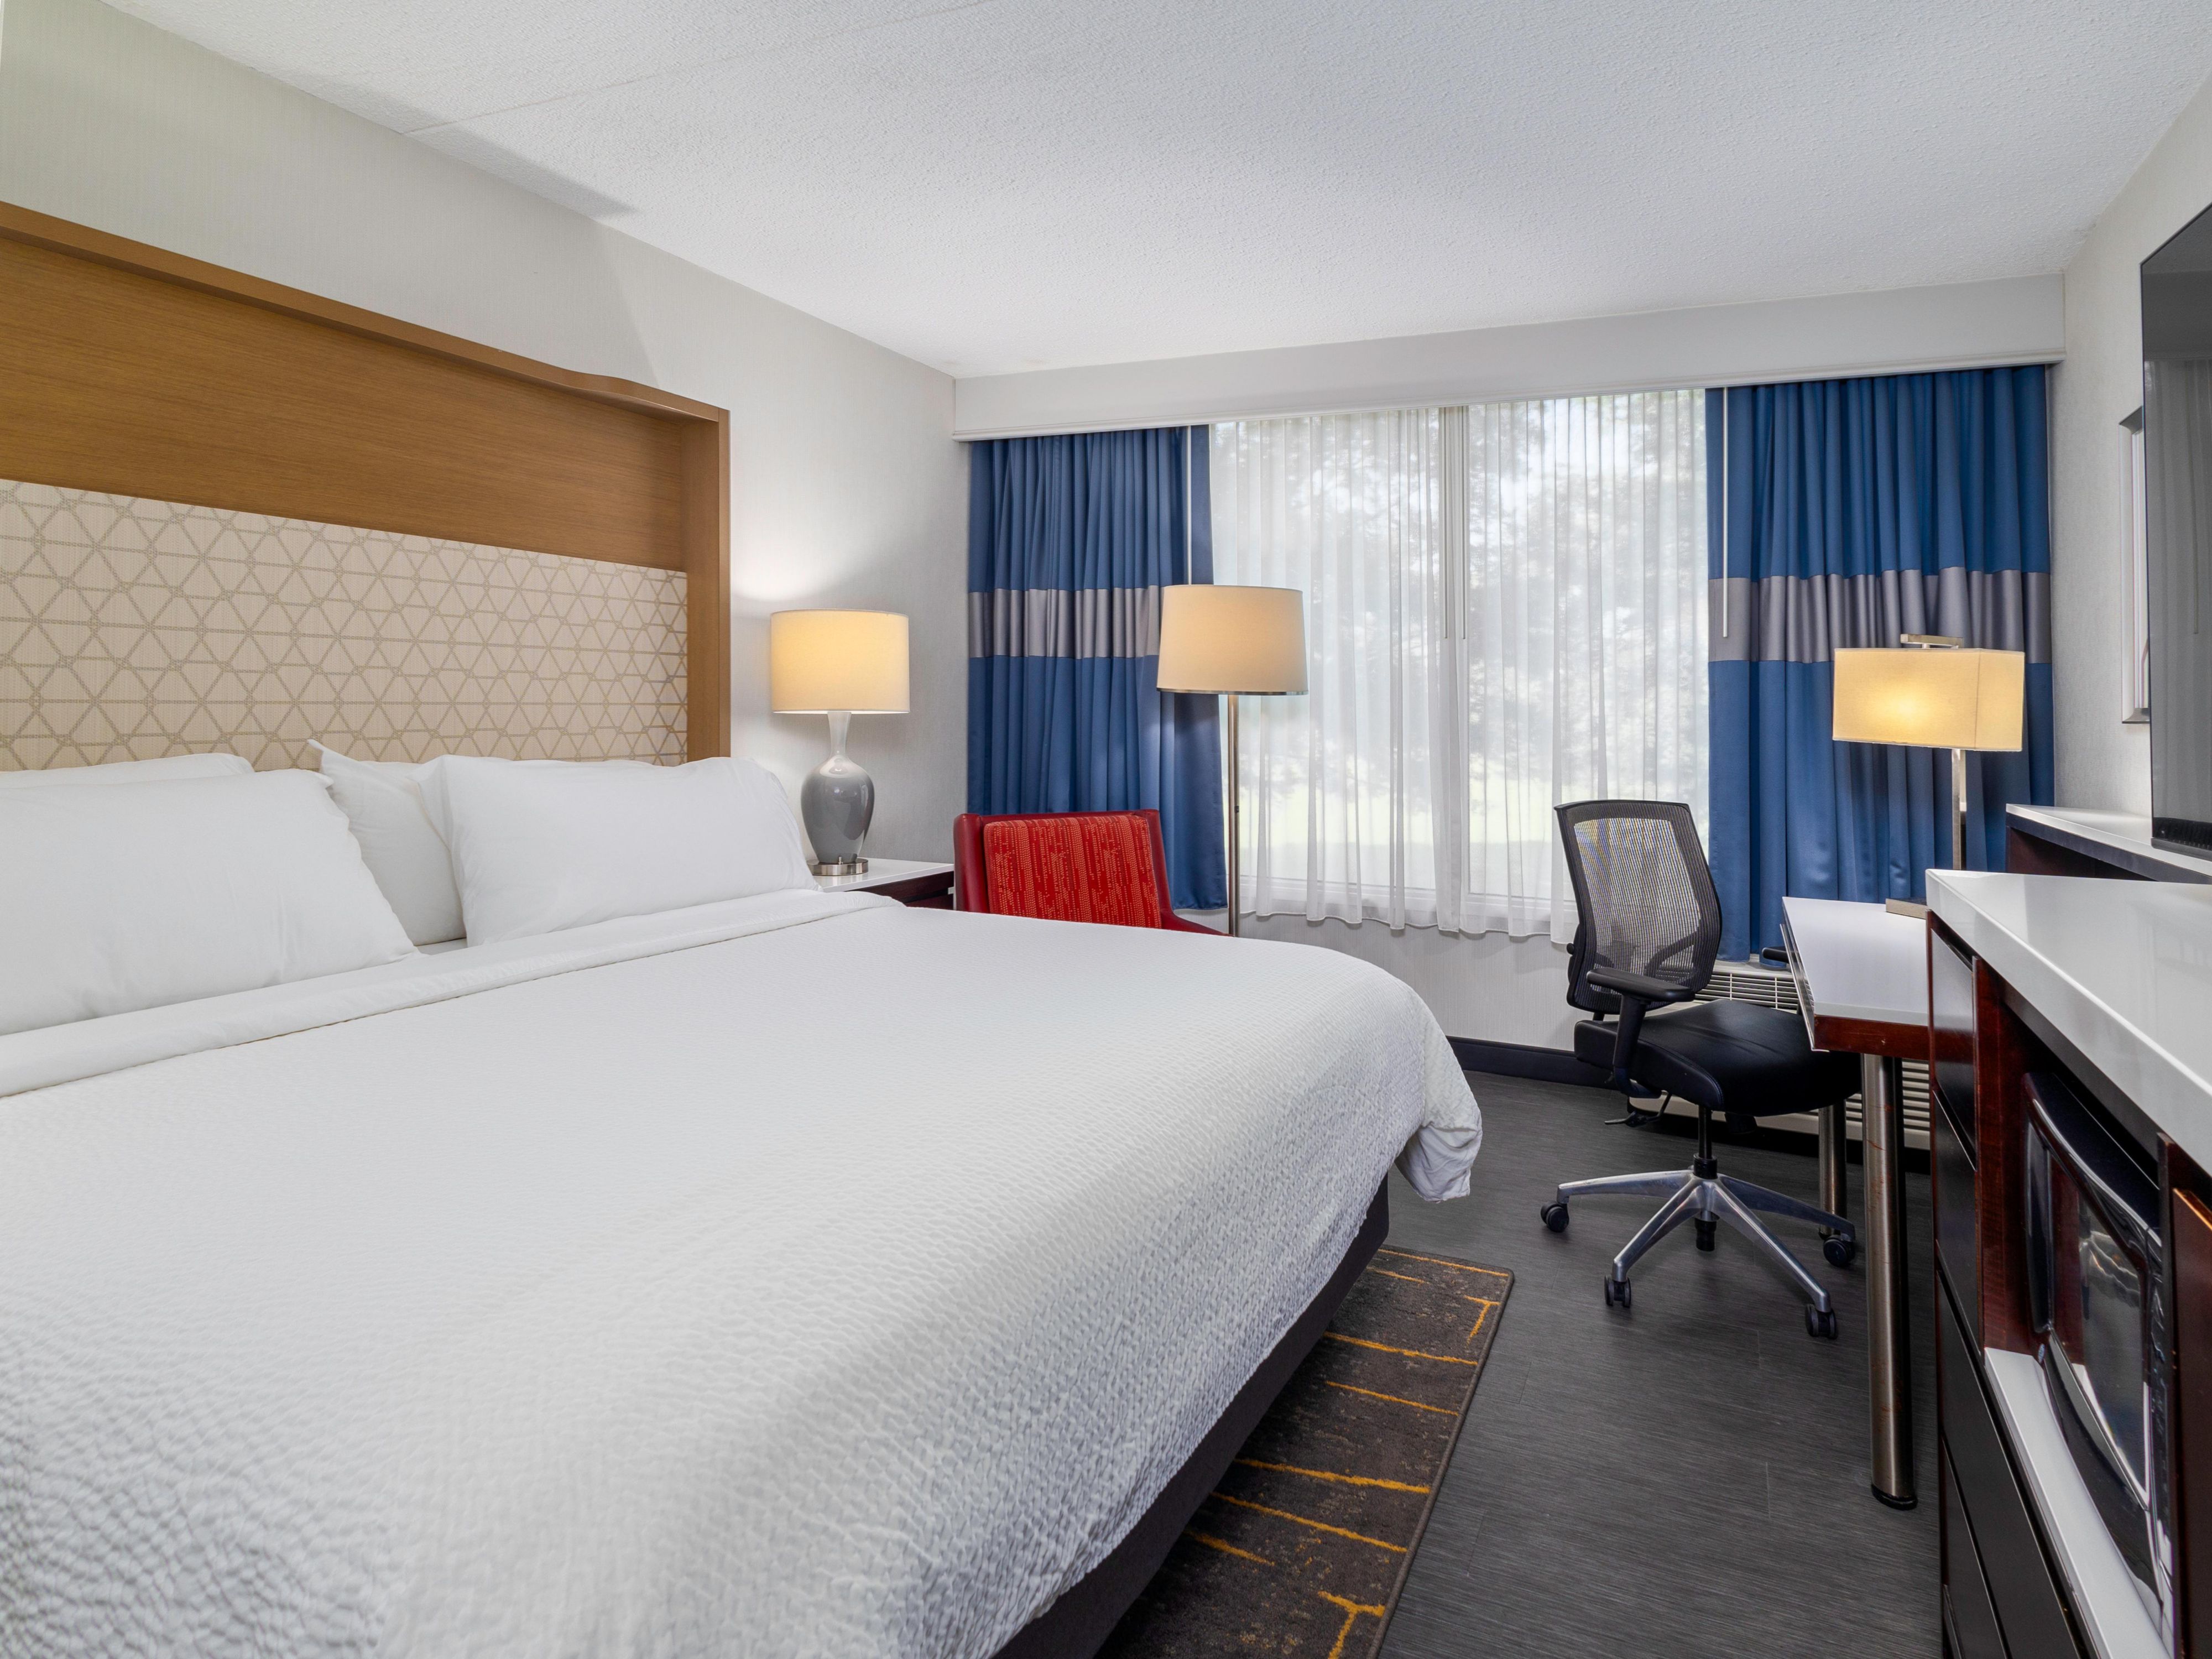 Visiting Weirton/Steubenville Area for a work, long term stay or a special event? Contact our Director of Sales  Brad at 304-723-5522 or Brad@HolidayInnWeirton.com. We can assist you in setting up overnight accommodations for your group or your corporate travel needs in the area. Learn more about the hotel and everything we offer by clicking below.